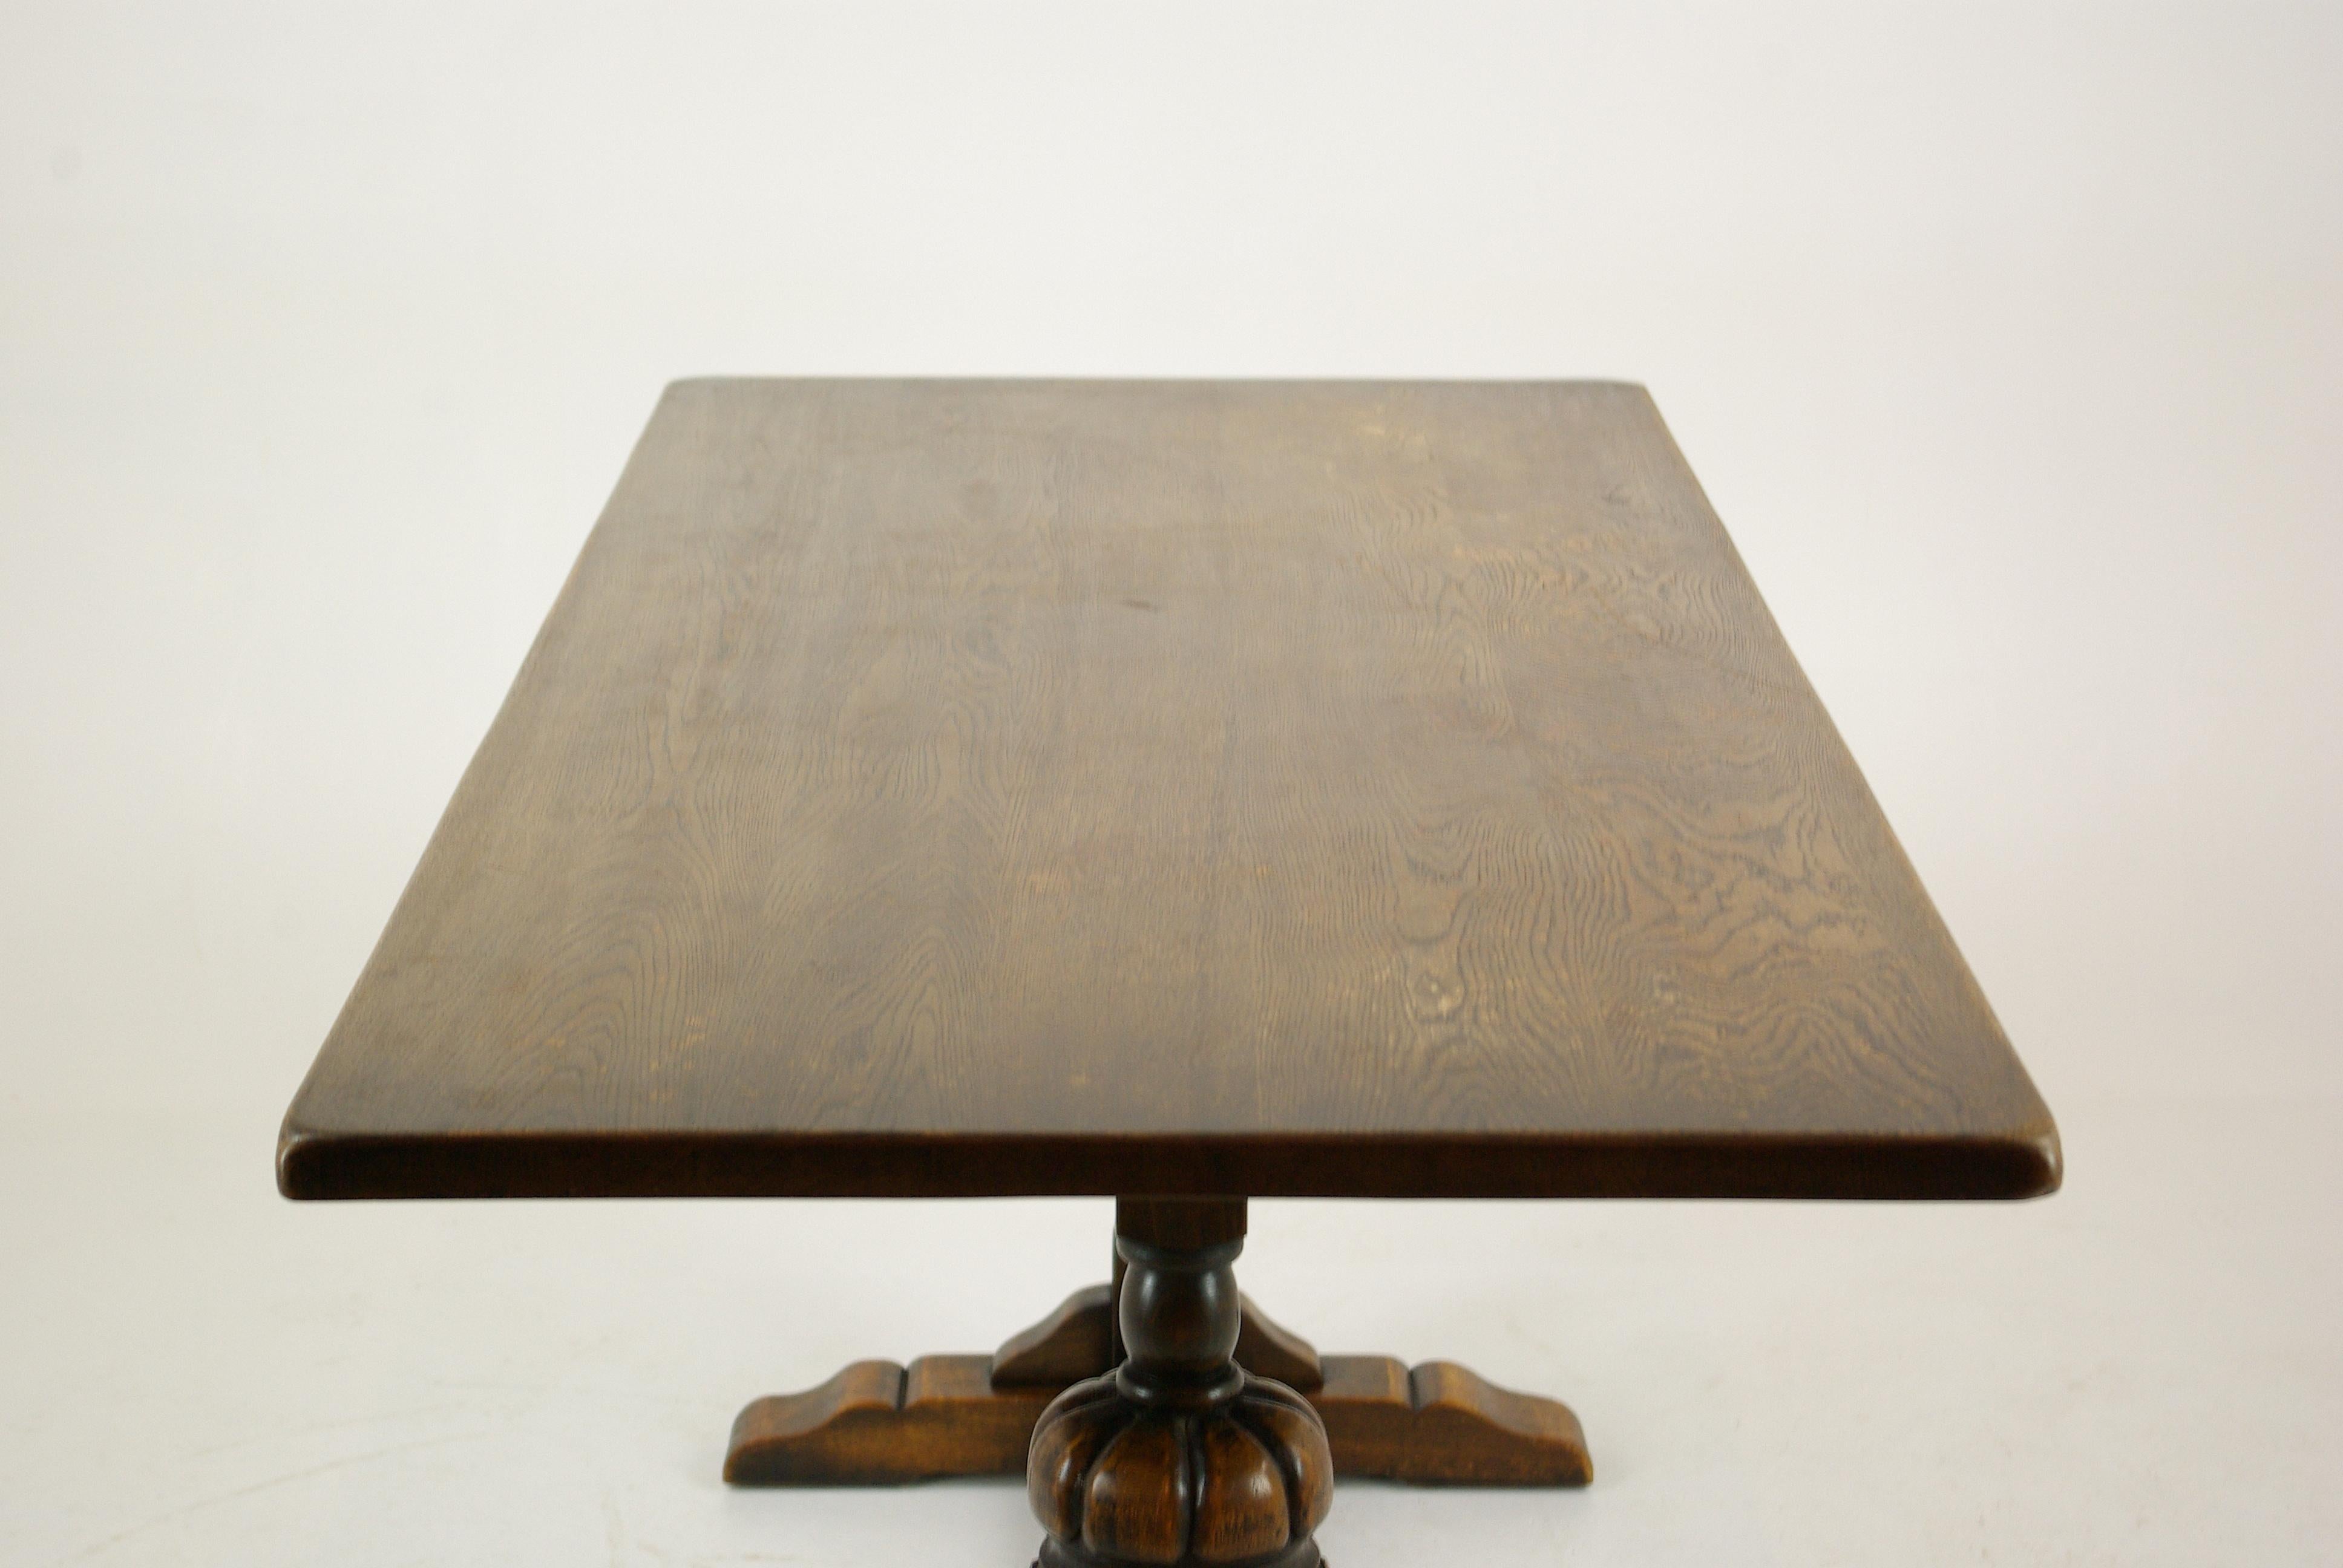 Oak Antique Refectory Table, Dining Table, Writing Table, Hall Table, 1920